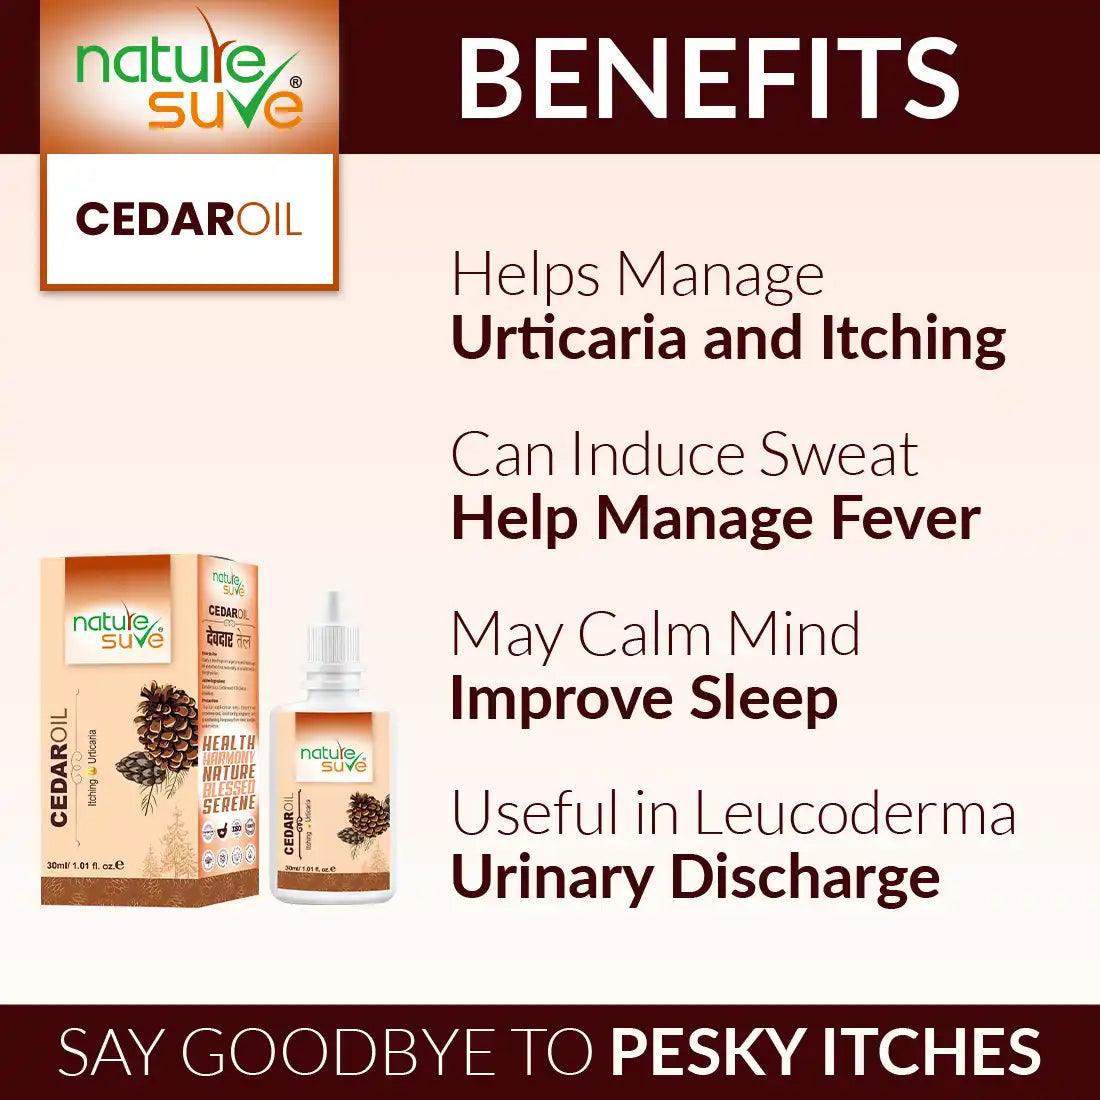 Nature Sure Cedar Oil Deodar Oil Is Useful for Itching, Urticaria, Leucoderma and Urinary Discharge - everteen-neud.com